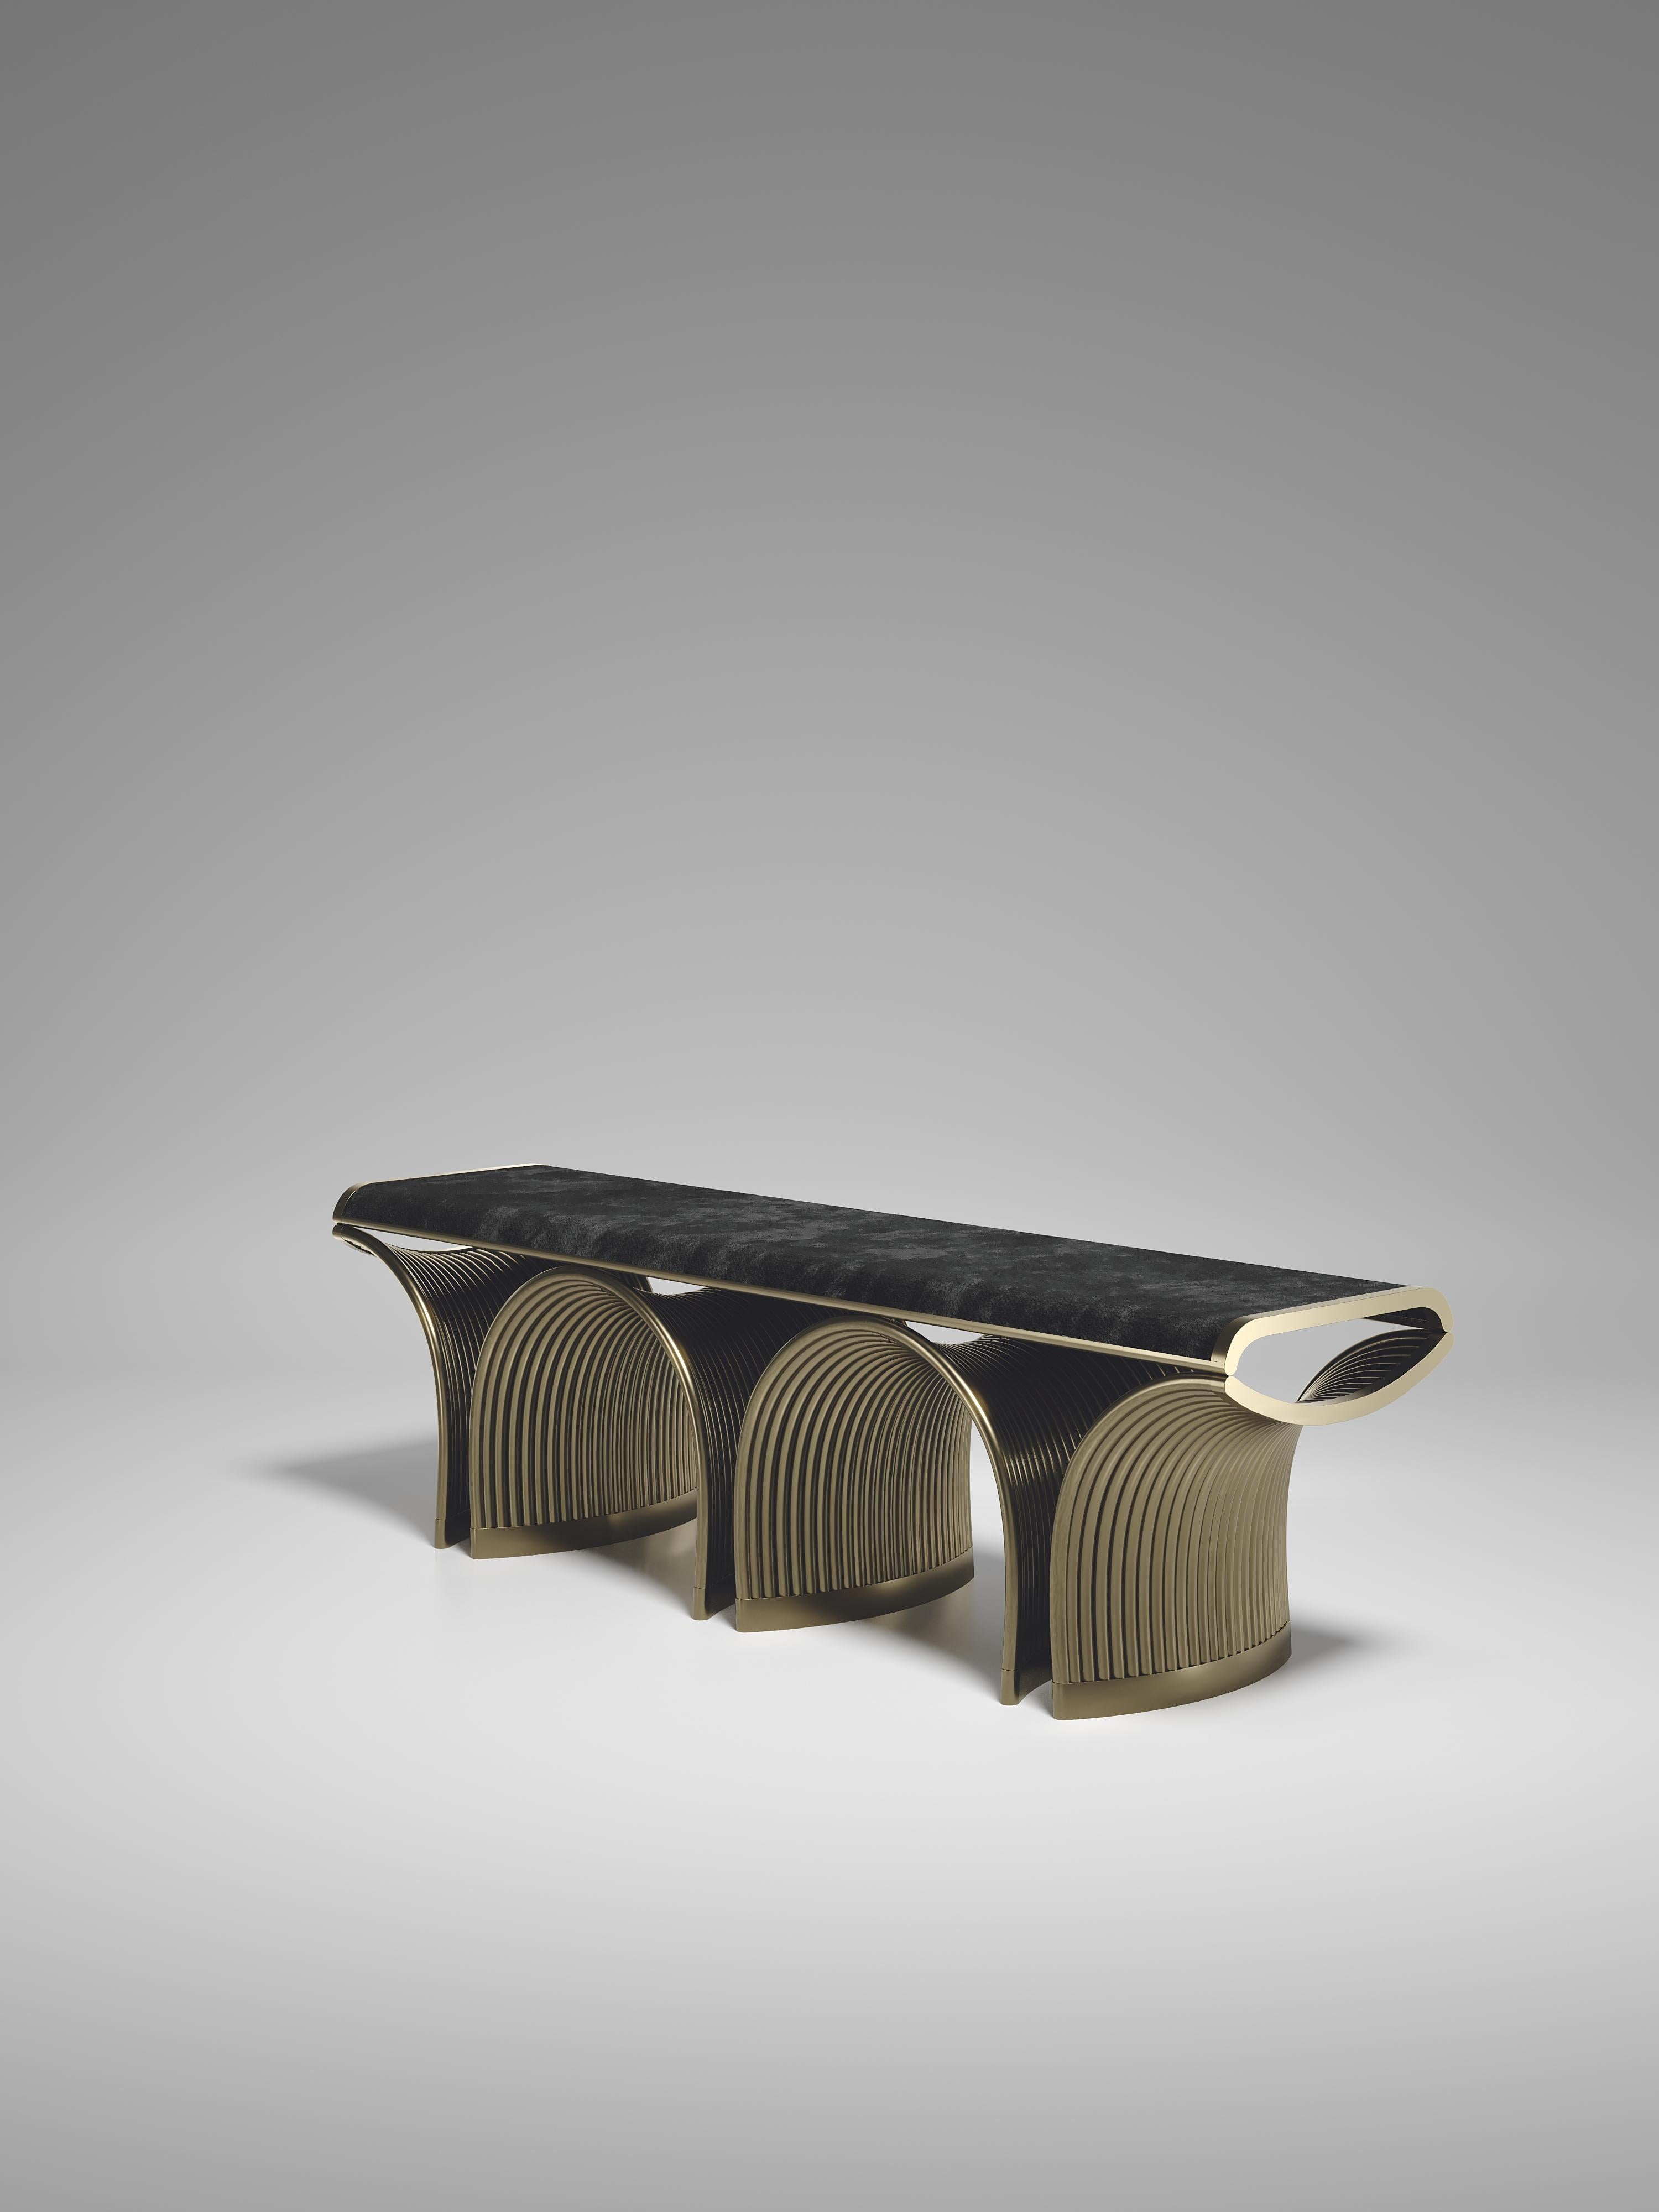 The Nymphea bench by R&Y Augousti upholstered in dark grey velvet with bronze-patina brass details explores the brand's iconic DNA of bringing old world artisanal craft into a contemporary and utterly luxury feel. The base of the bench is